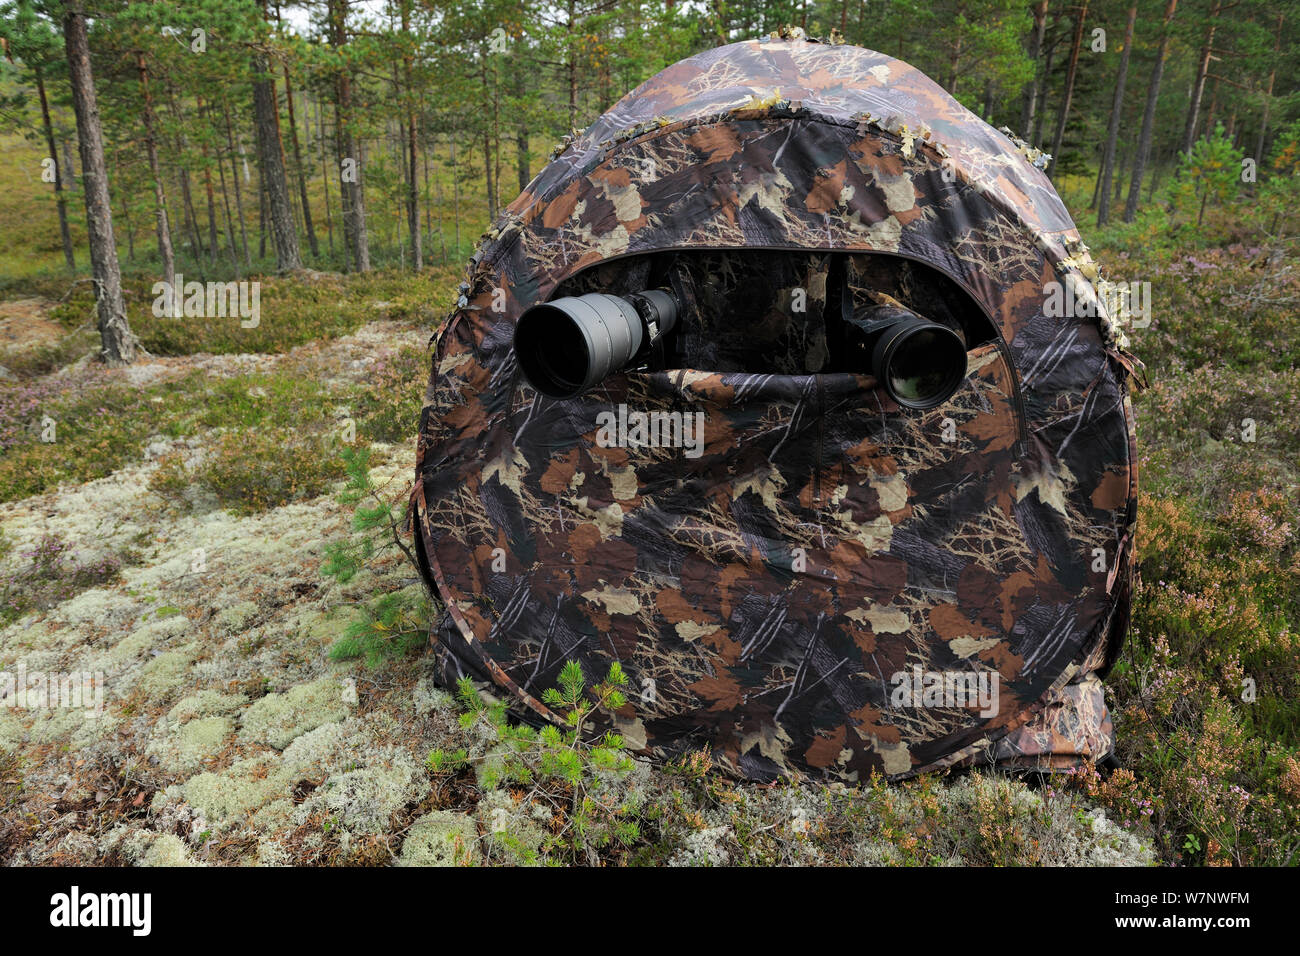 Photography tent / hide, set up for bear watching, Karmansbo, Vastmanland, Sweden August 2011 Stock Photo